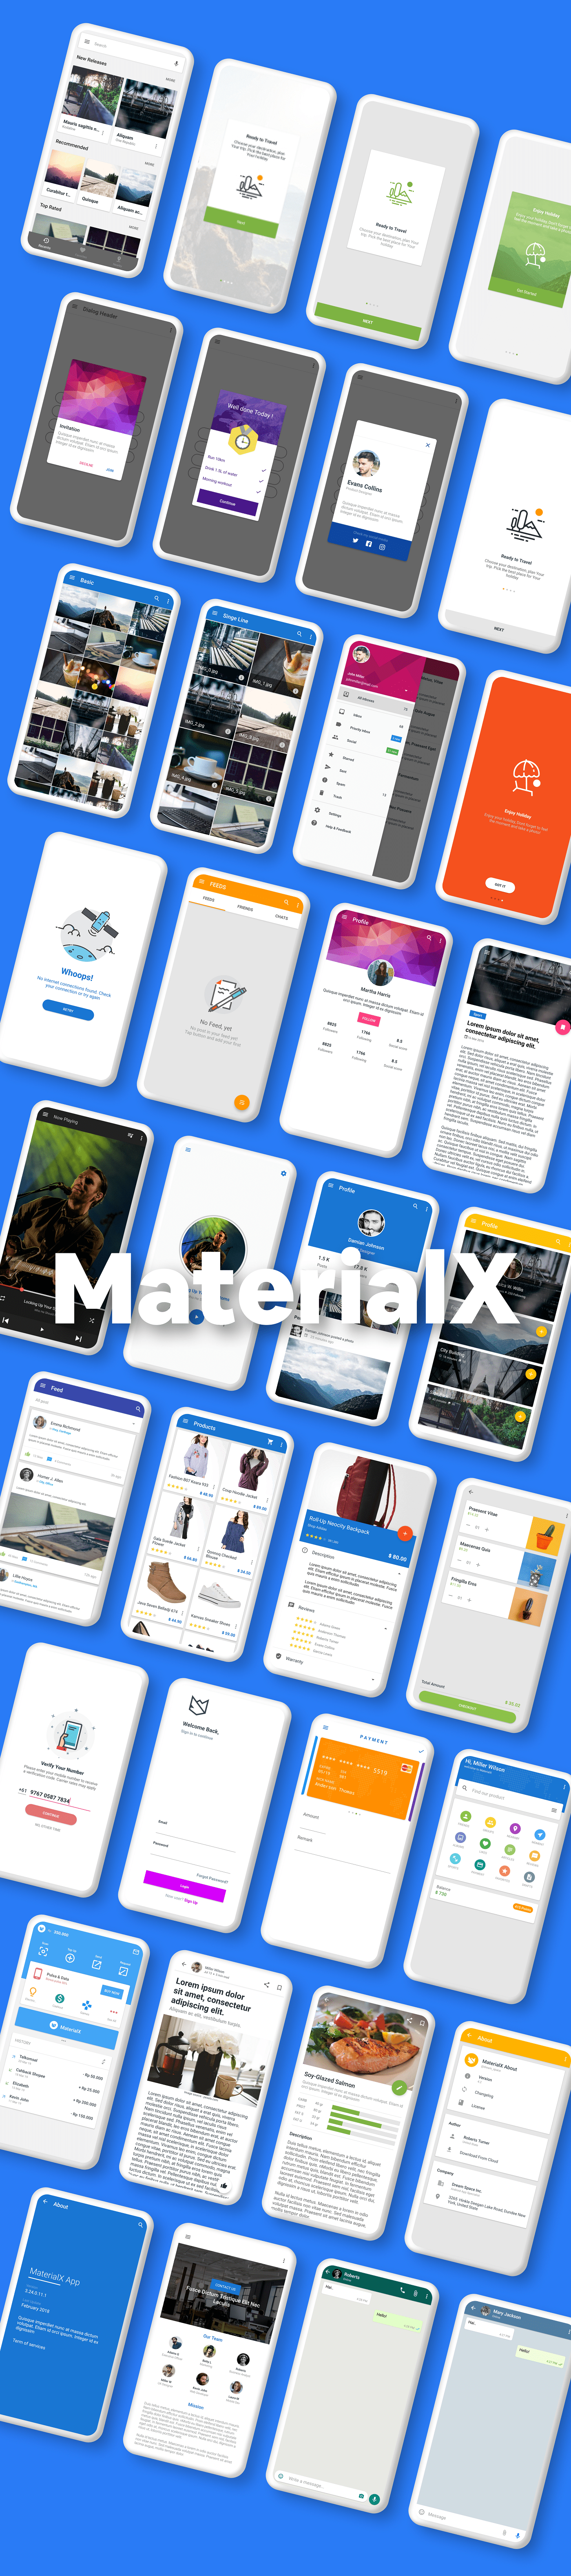 MaterialX - Android Material Design UI Components 2.7 - 5